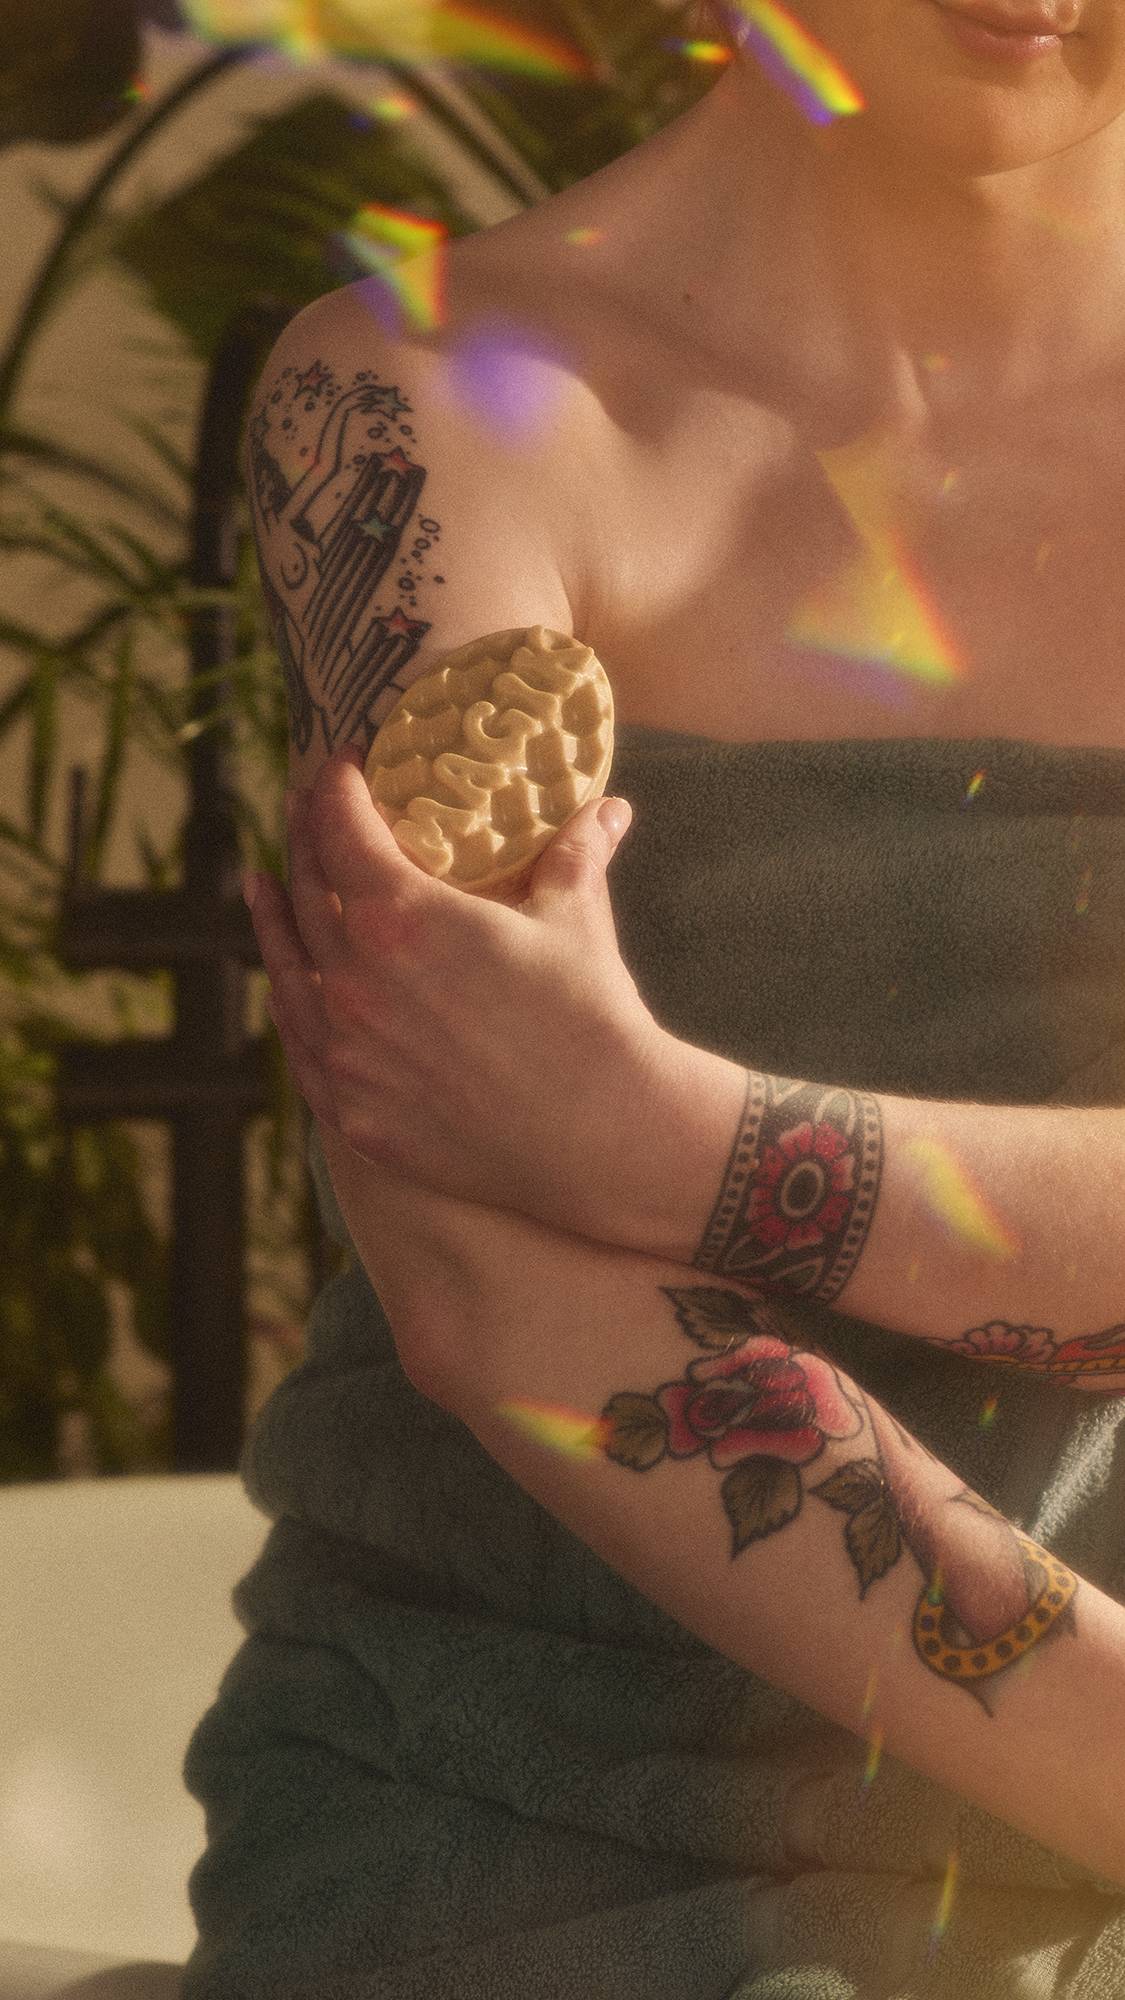 A close-up of the model's torso as they are wrapped in a sage green towel sitting on the edge of the bathtub using the Magik massage bar over their upper arm. The image has flecks of rainbow reflections on a warm, sepia tone.